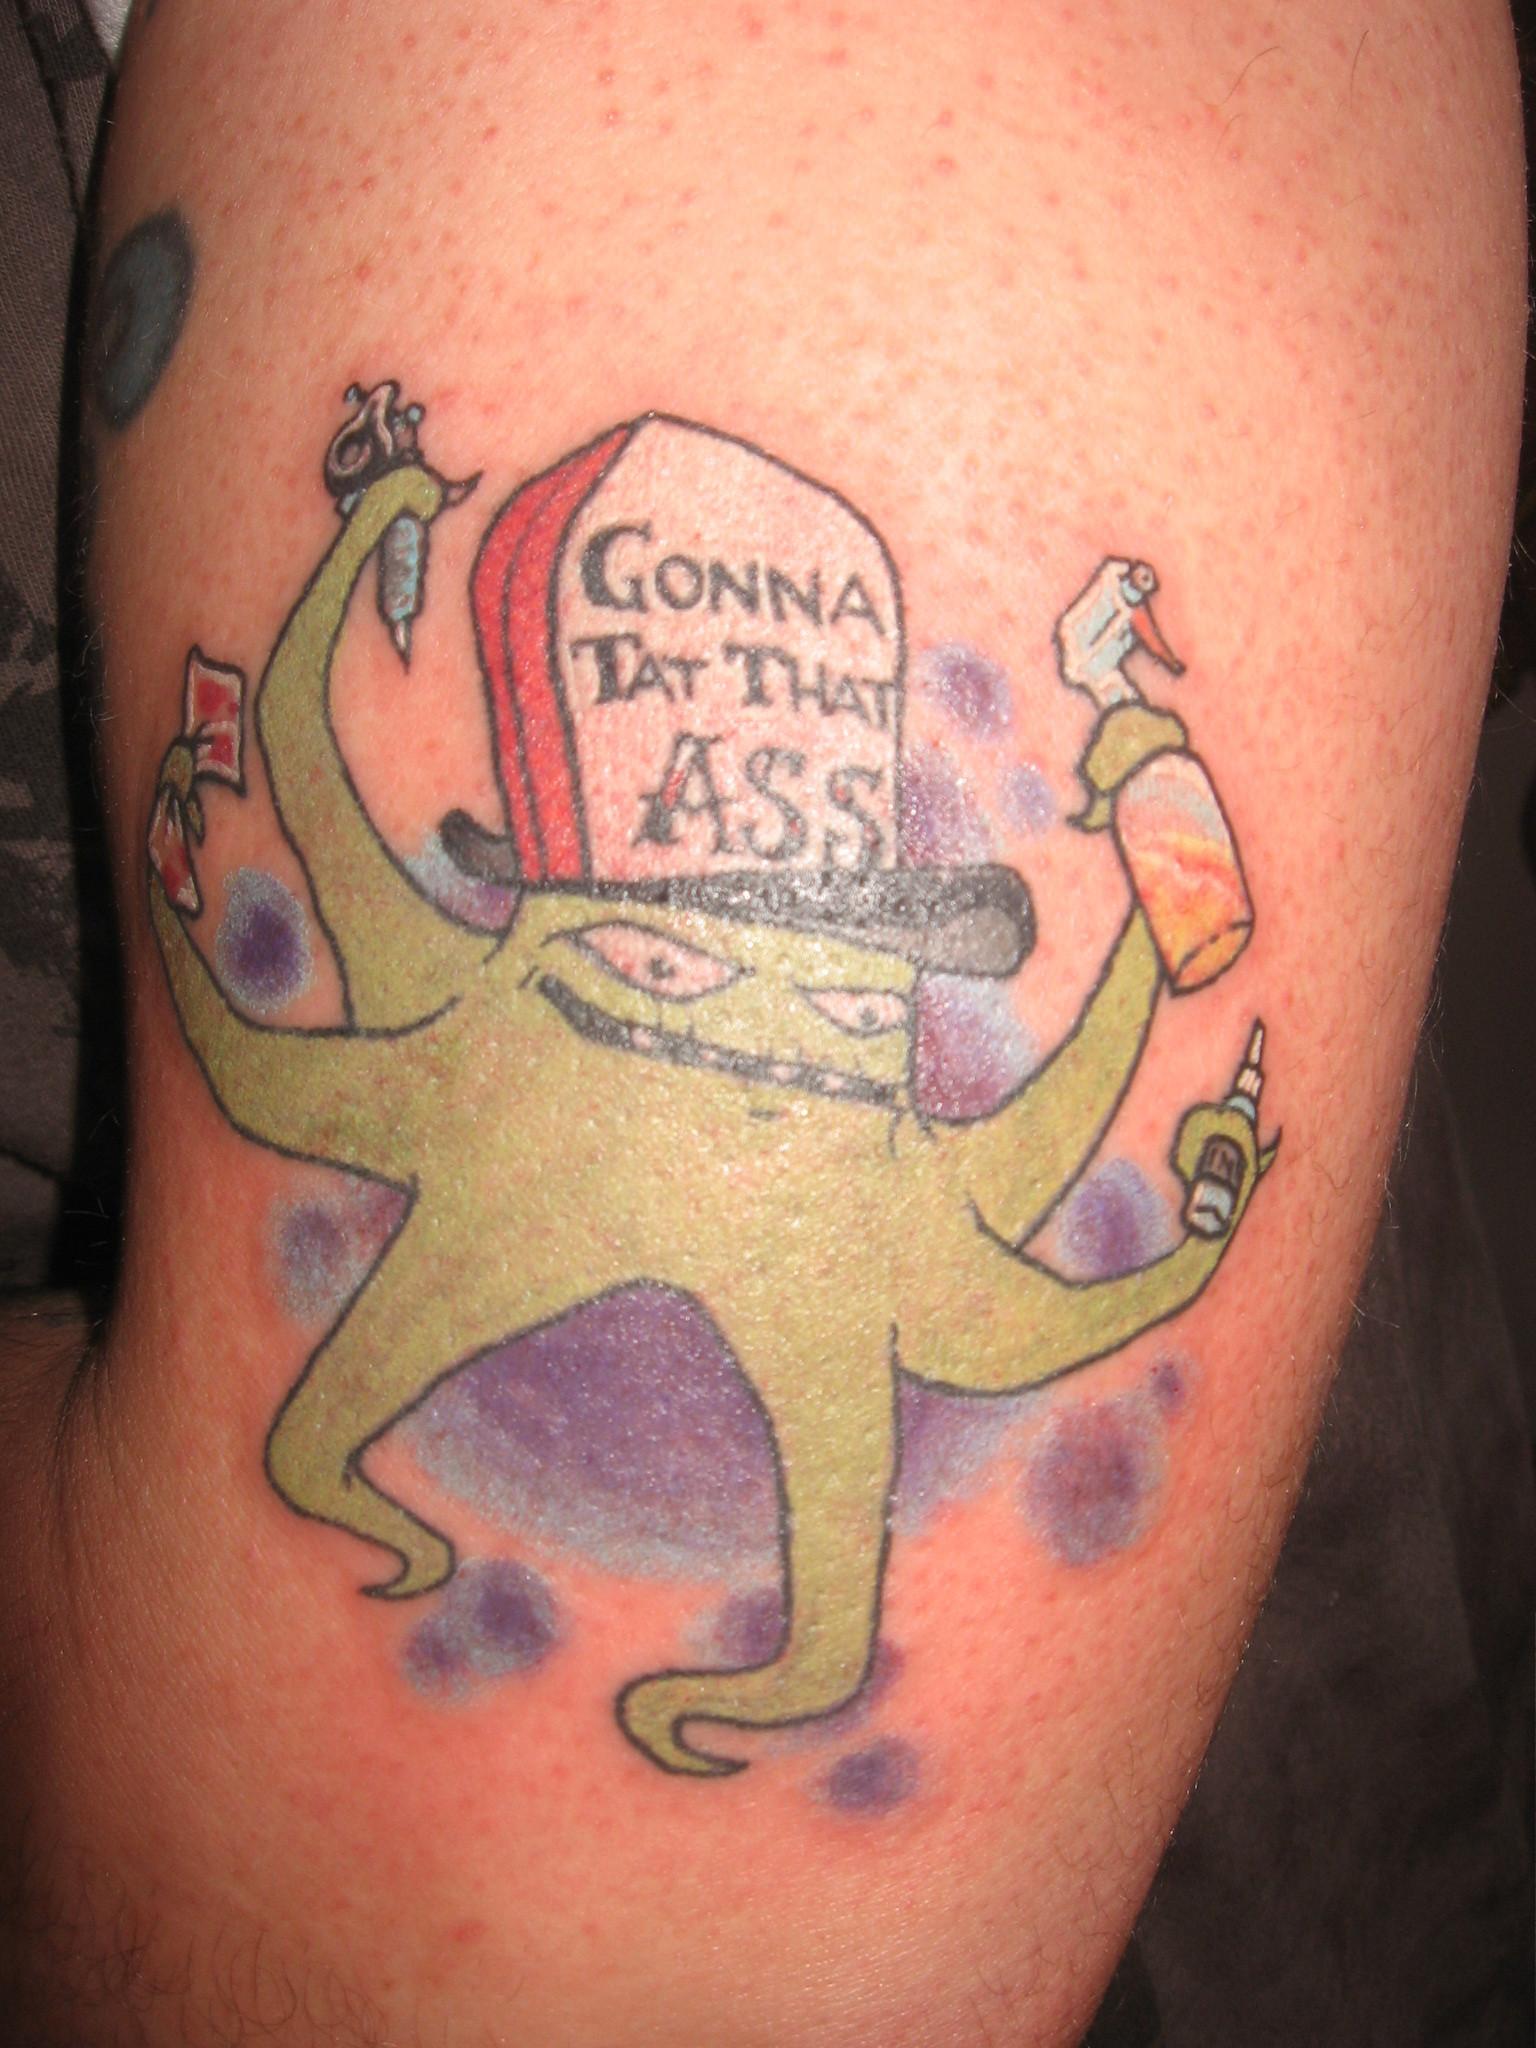 Adult Swim image Squidbillies Tattoo HD wallpapers and backgrounds